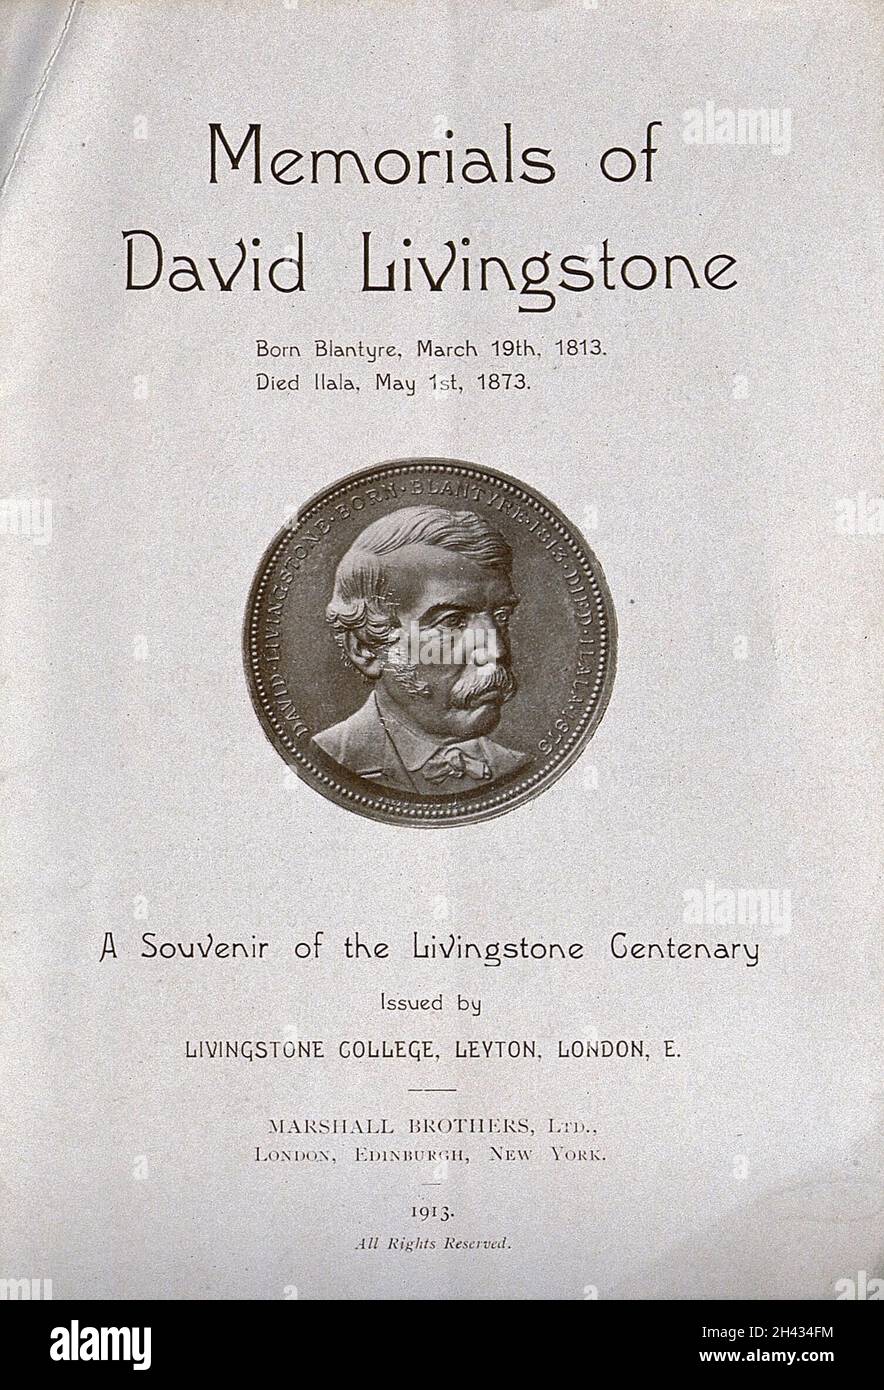 David Livingstone Centenary Medal, issued by the London Missionary Society. Process print and letterpress Stock Photo